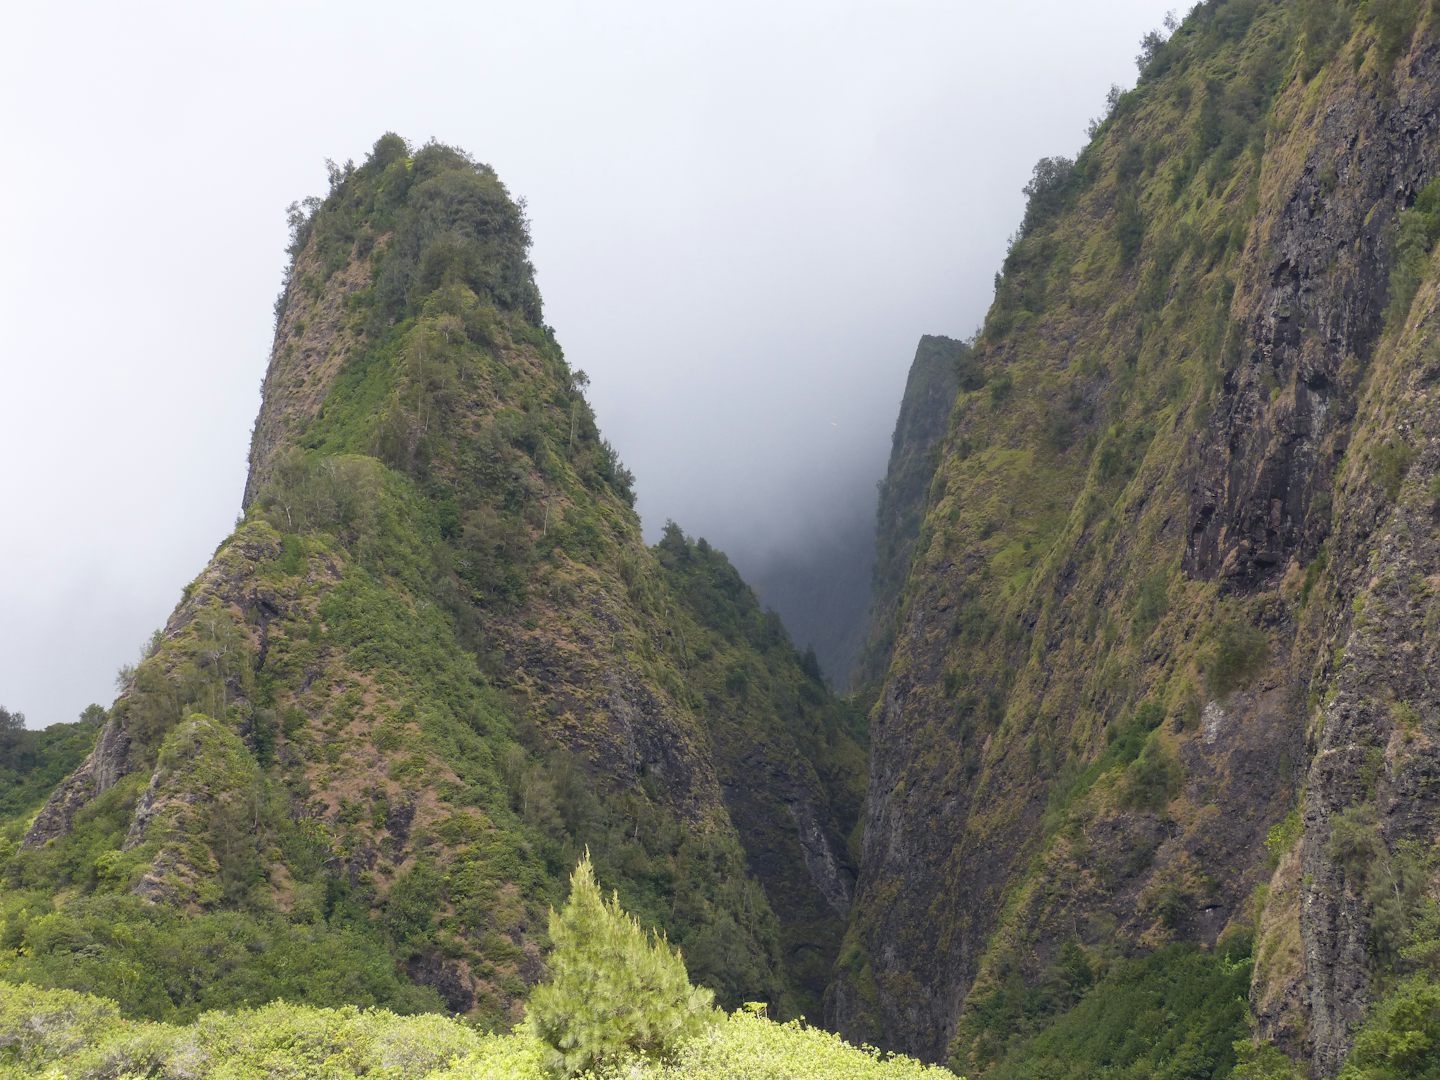 Iao State Valley